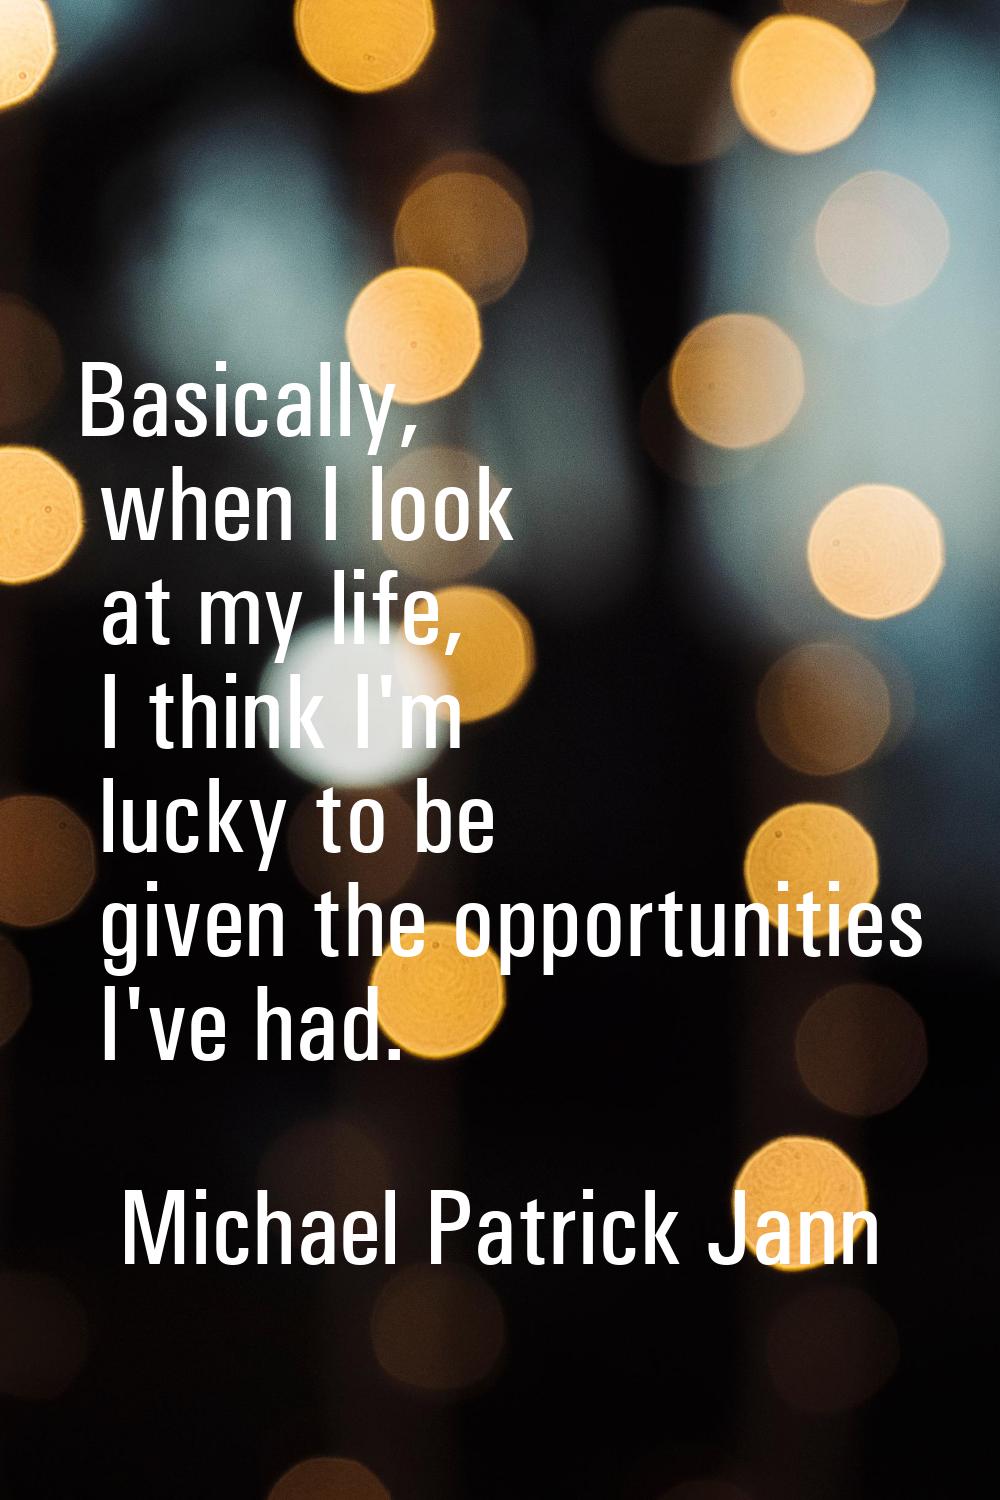 Basically, when I look at my life, I think I'm lucky to be given the opportunities I've had.